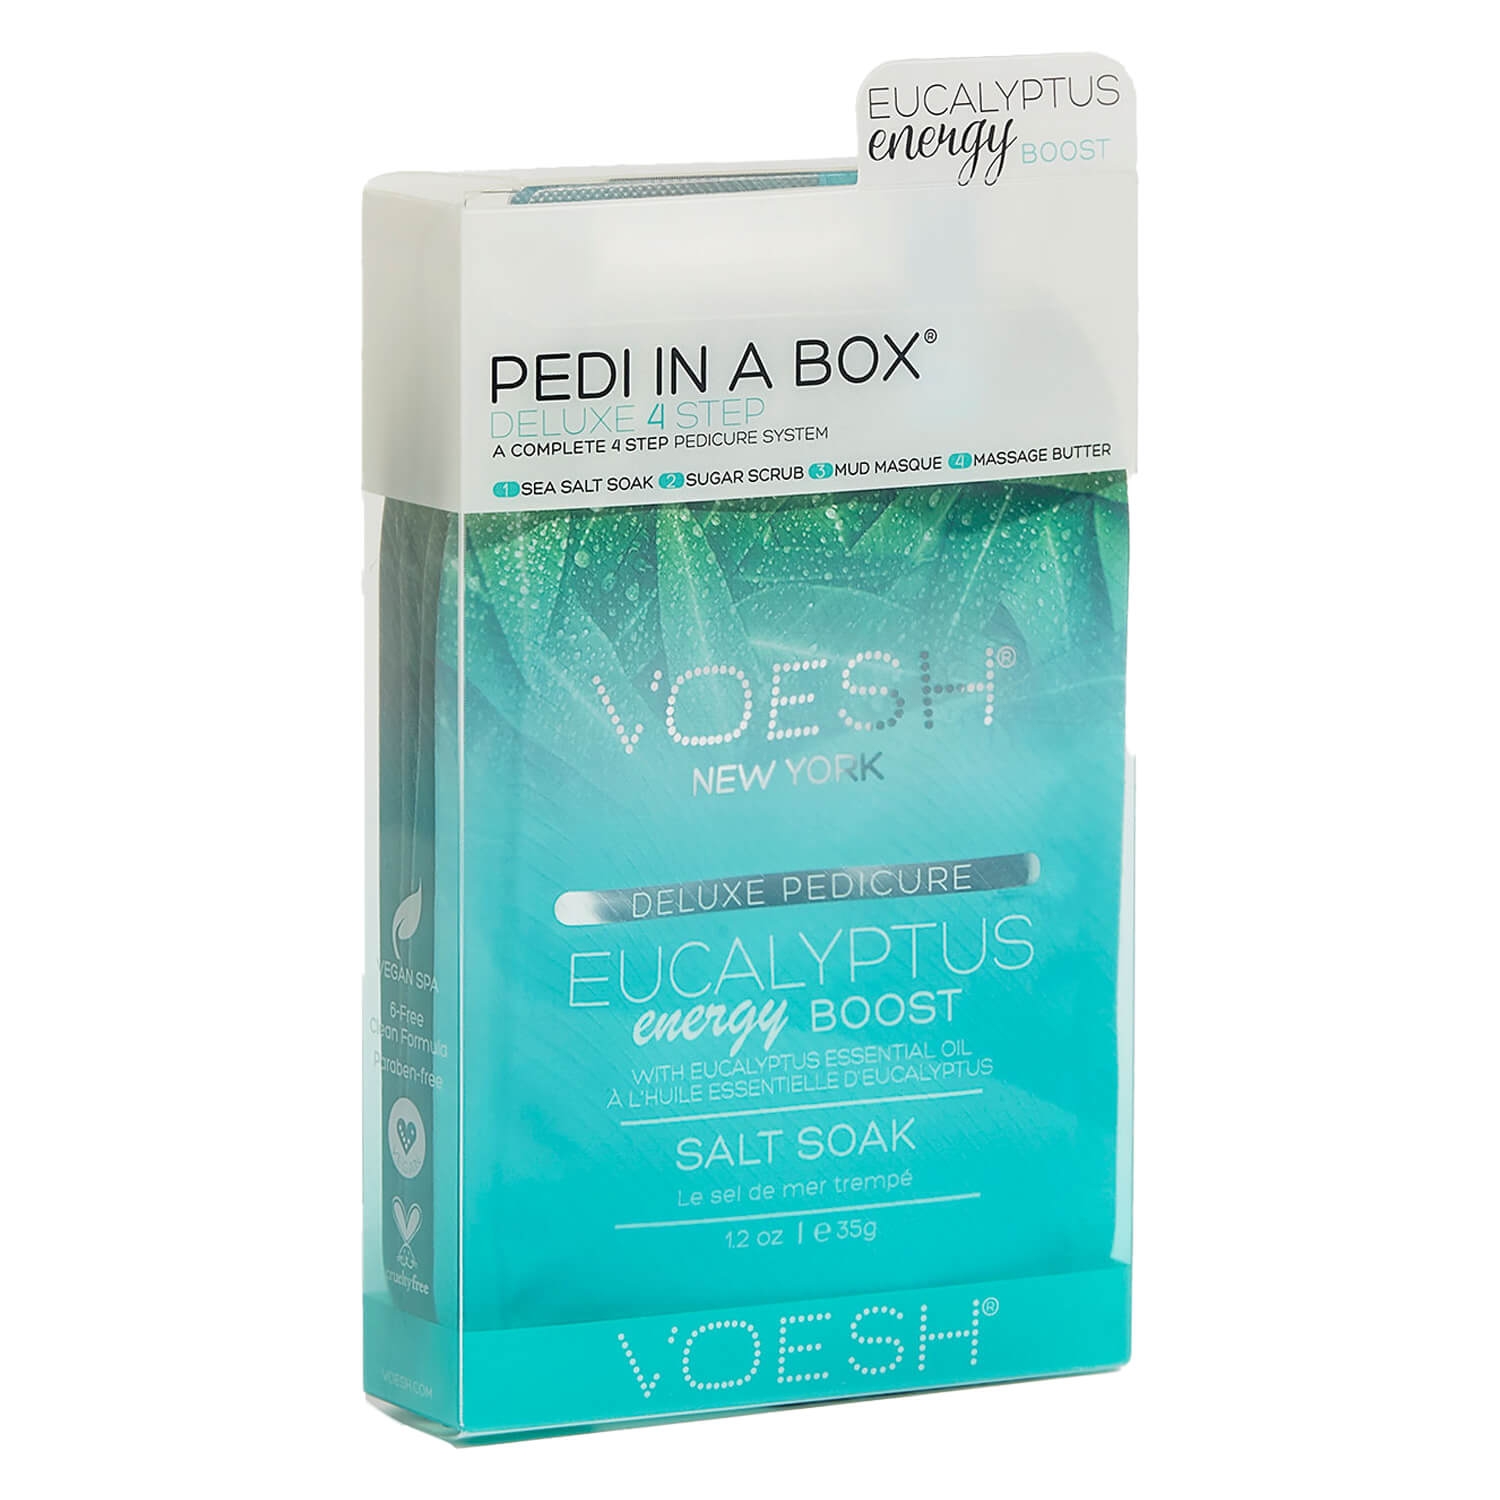 Product image from VOESH New York - Pedi In A Box 4 Step Ecualyptus Energy